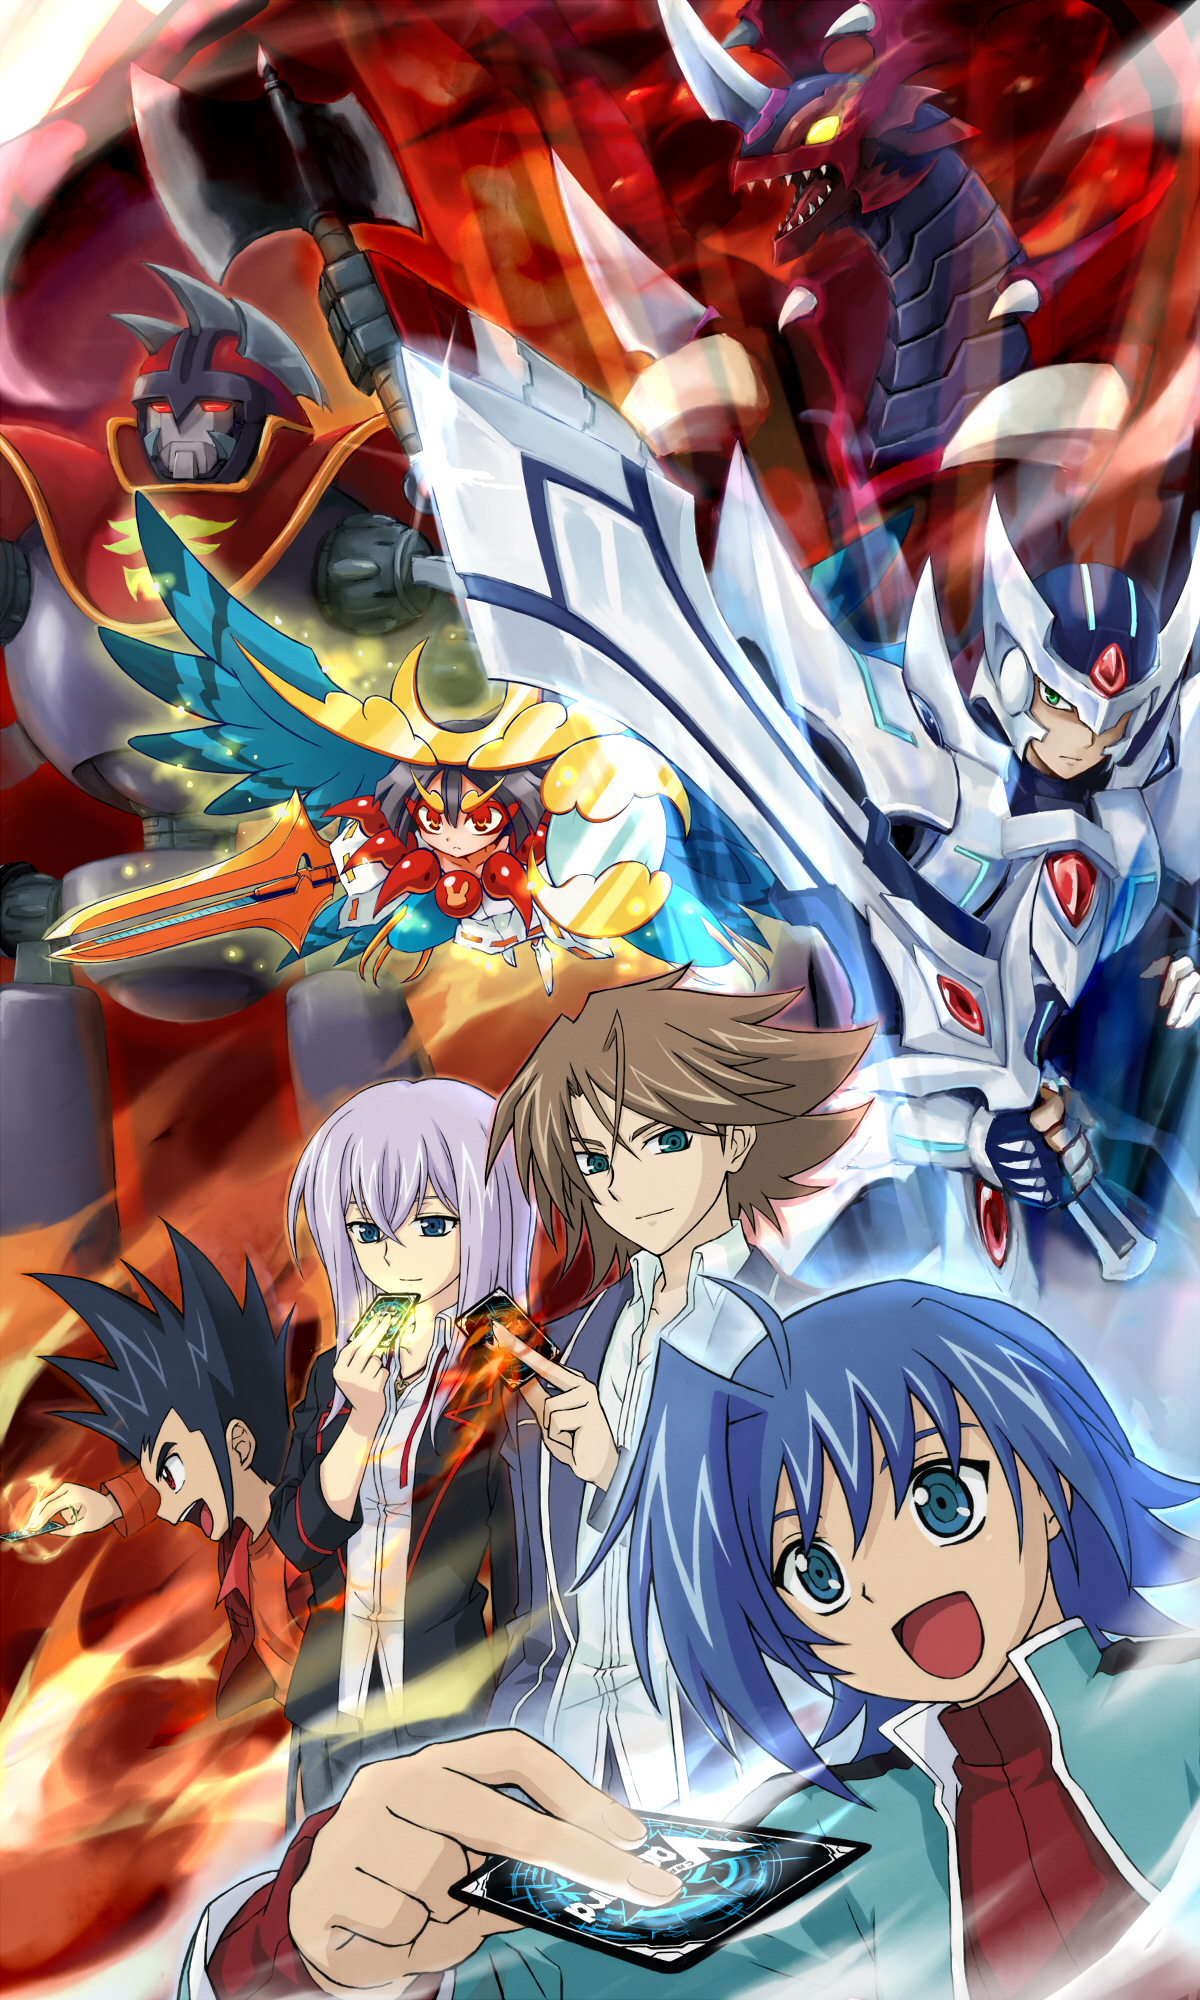 With 2 New Anime and a Smartphone Game, There's Lots of Cardfight!! Vanguard  To Go Around This Year